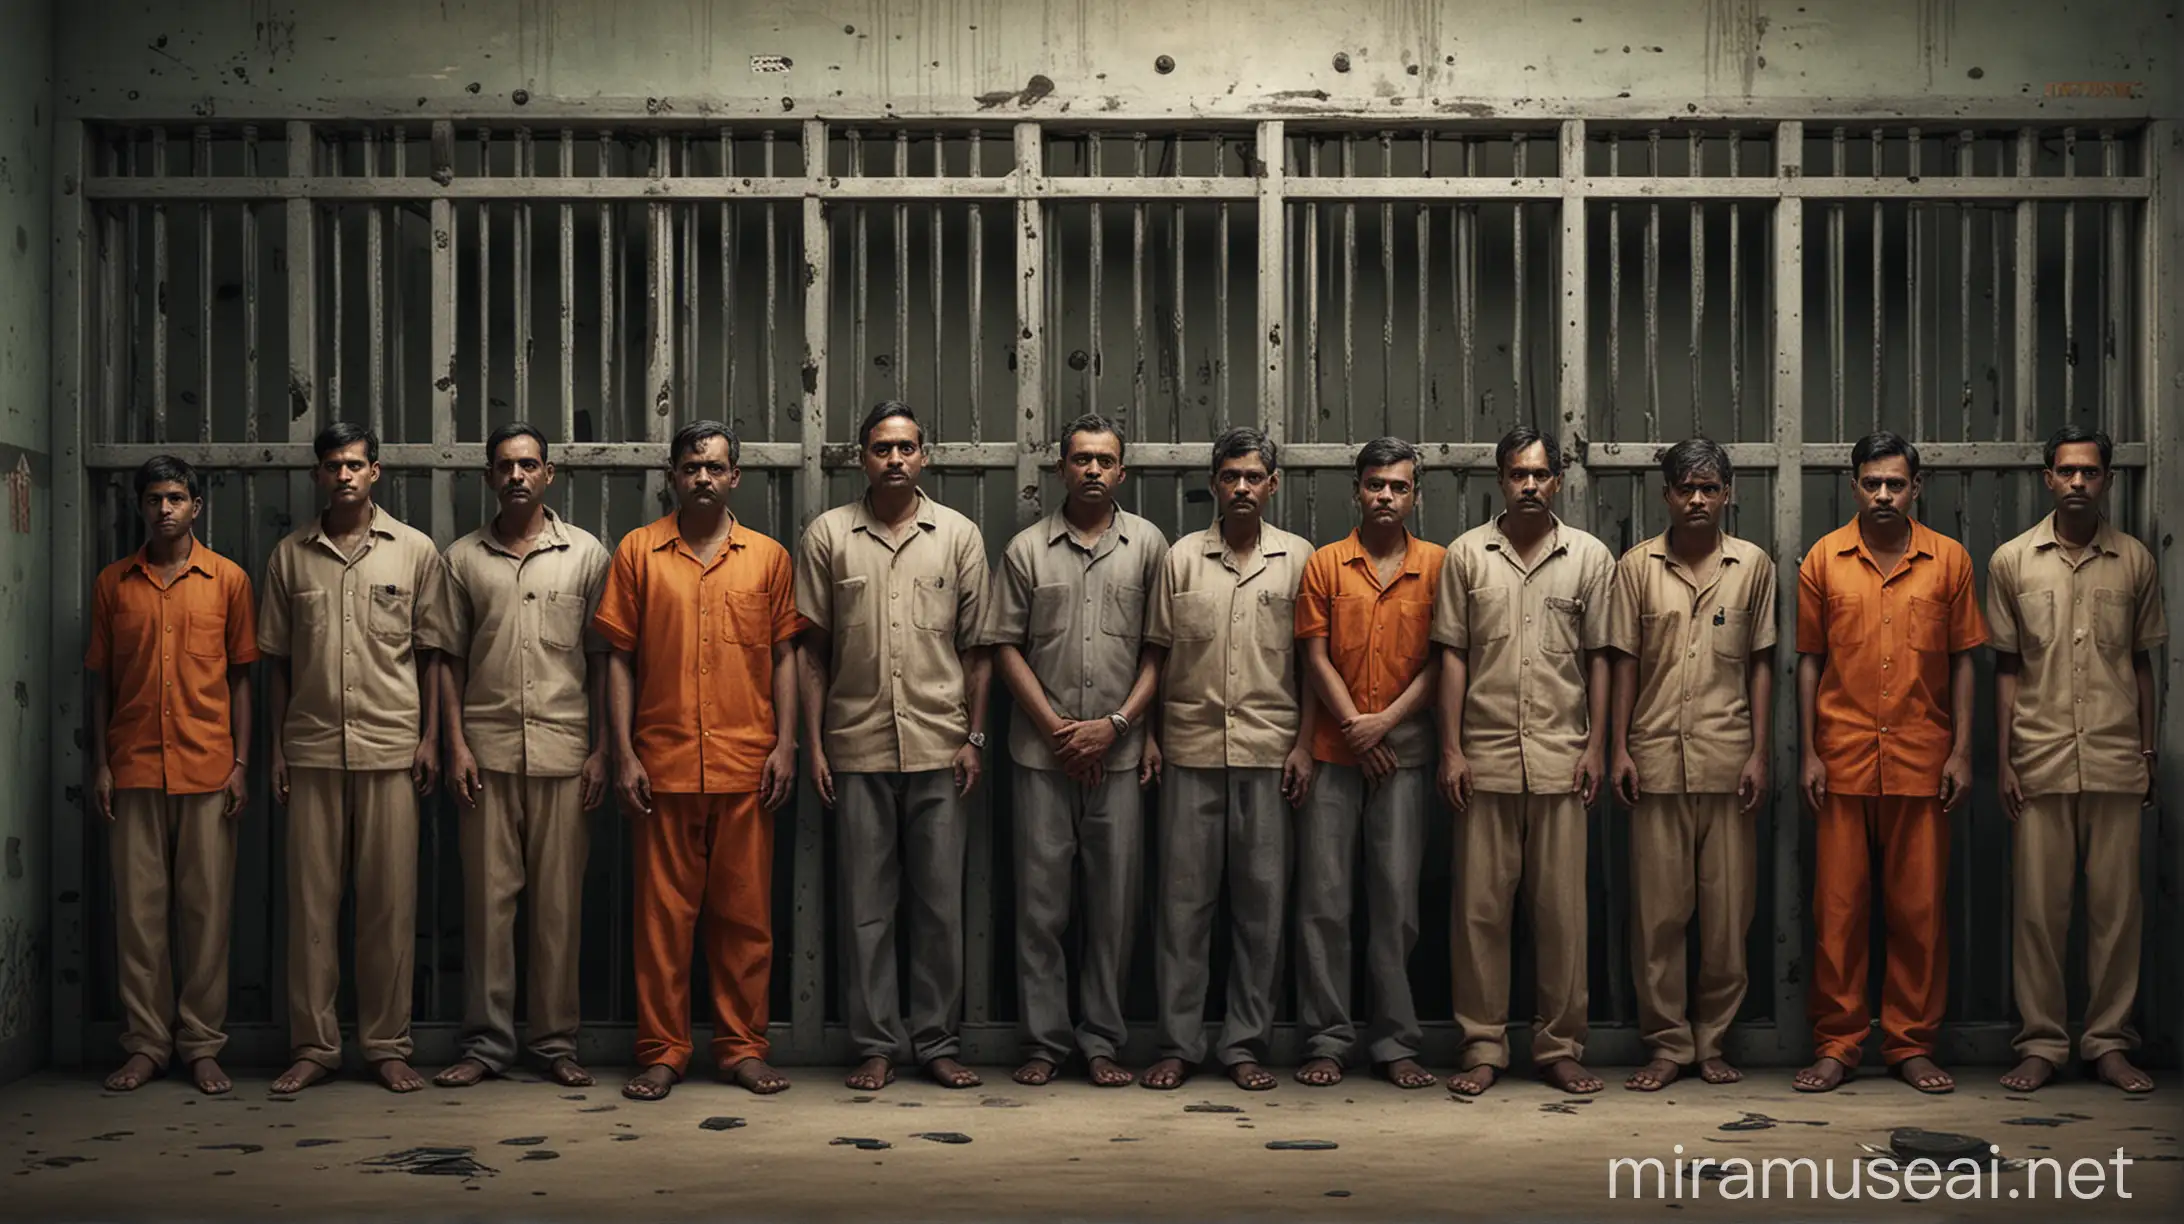 realistic ai image: people imprisoned in indian jails

